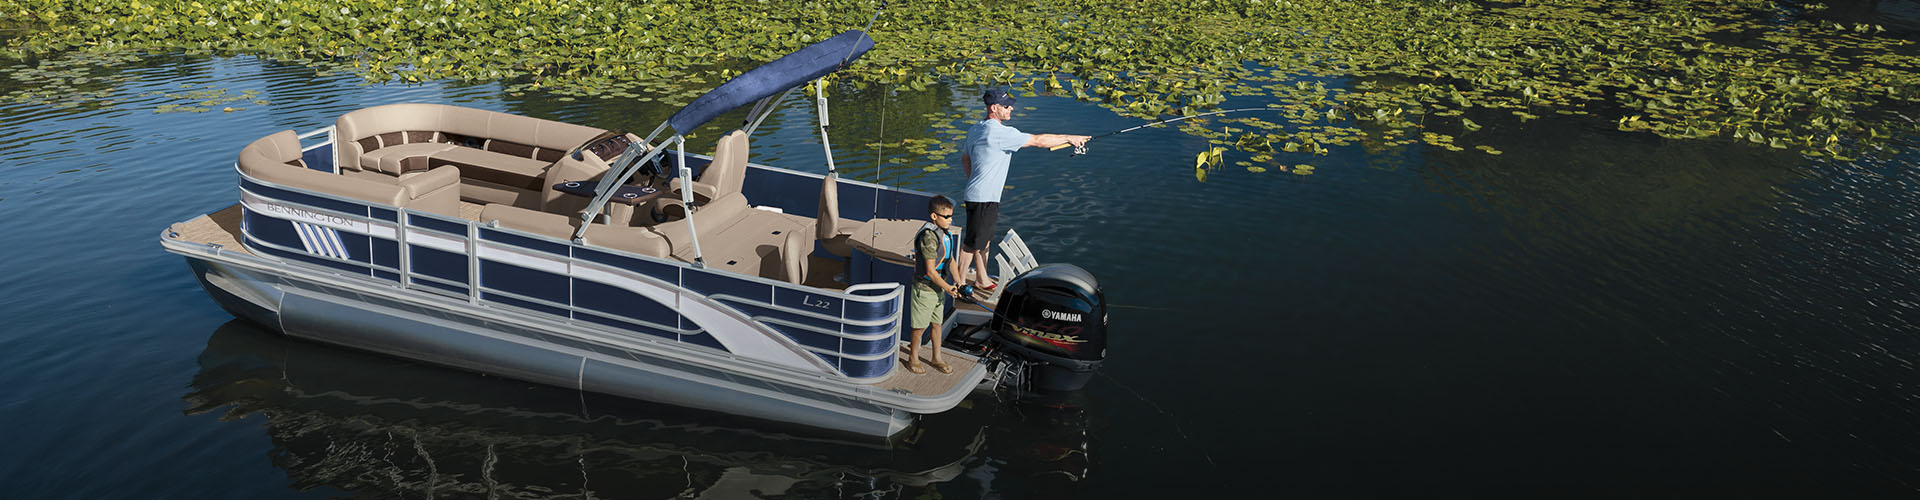 Best Boat Anchors: Pontoon Boats on Lakes